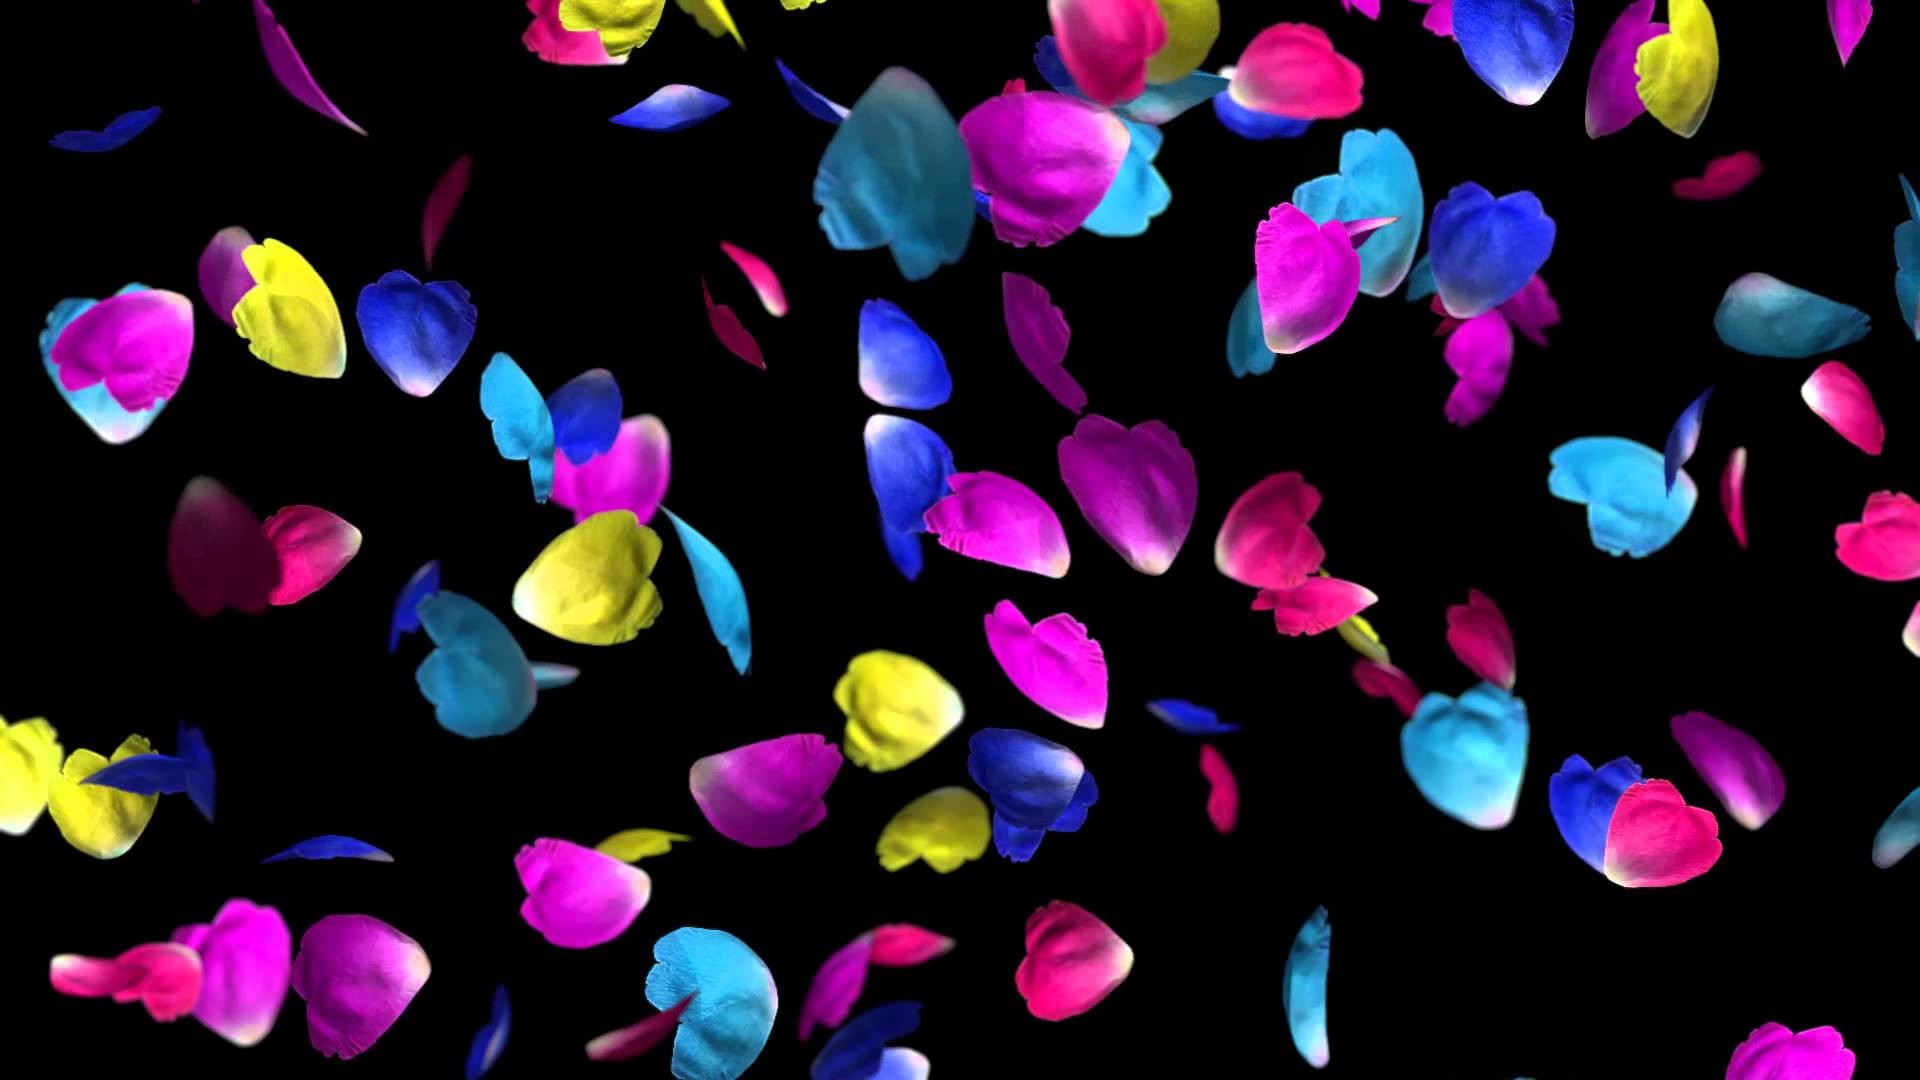 1920x1080 Free Colored Flower Falling Petals - wedding background full HD - YouTube